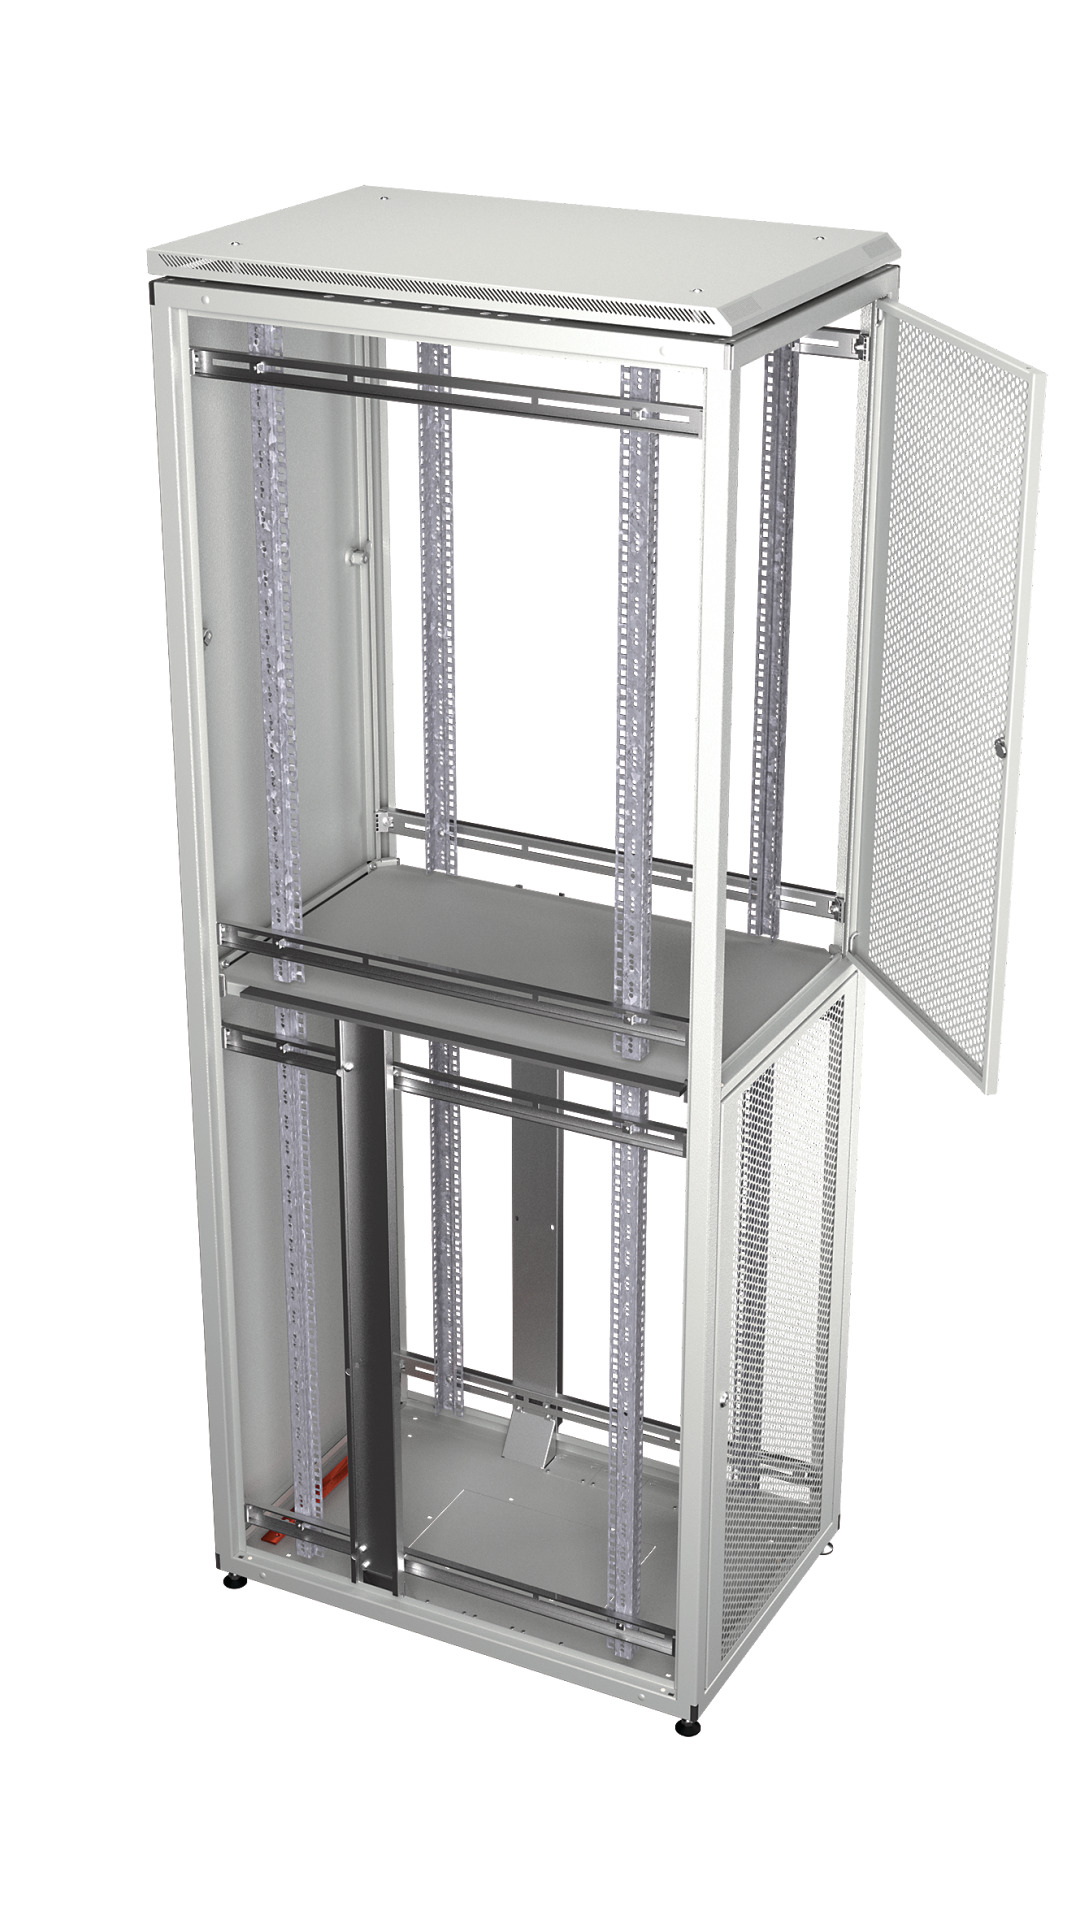 Co-Location Rack PRO, 2 x 20U, 600x1200 mm, F+R 1-Part Perforated, RAL9005